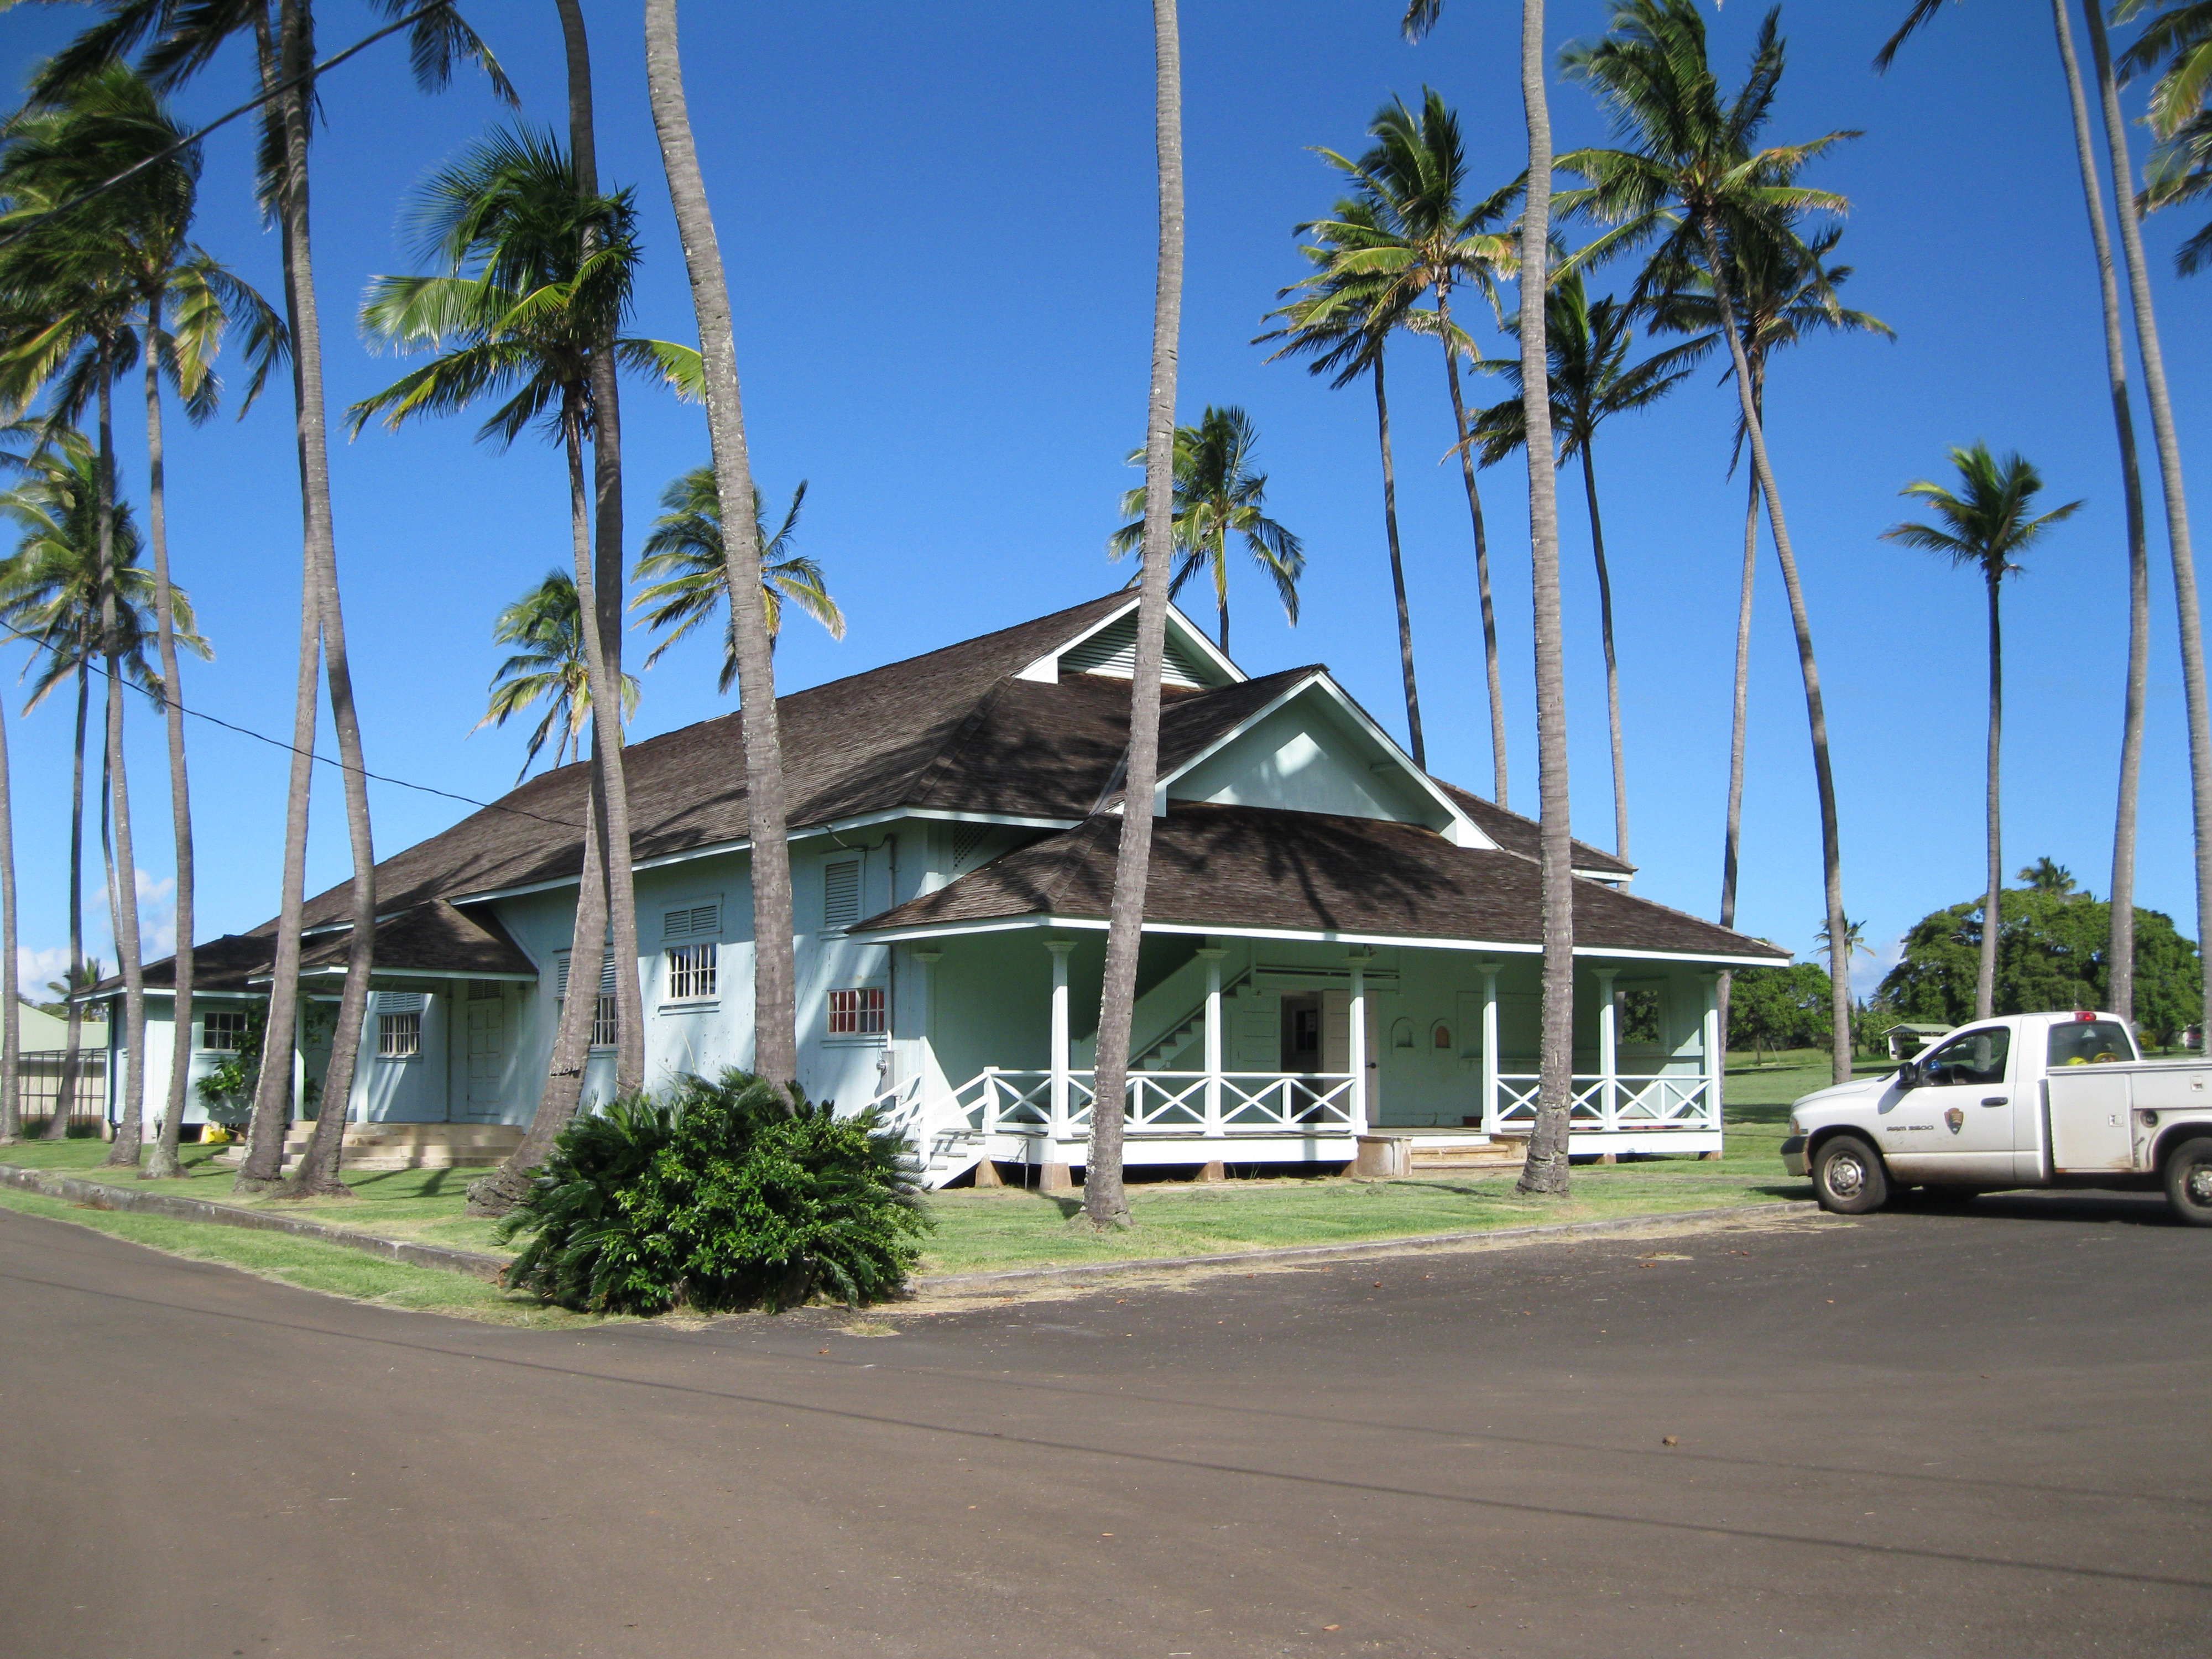 View of Paschoal Hall also known as the Kalaupapa Social Hall